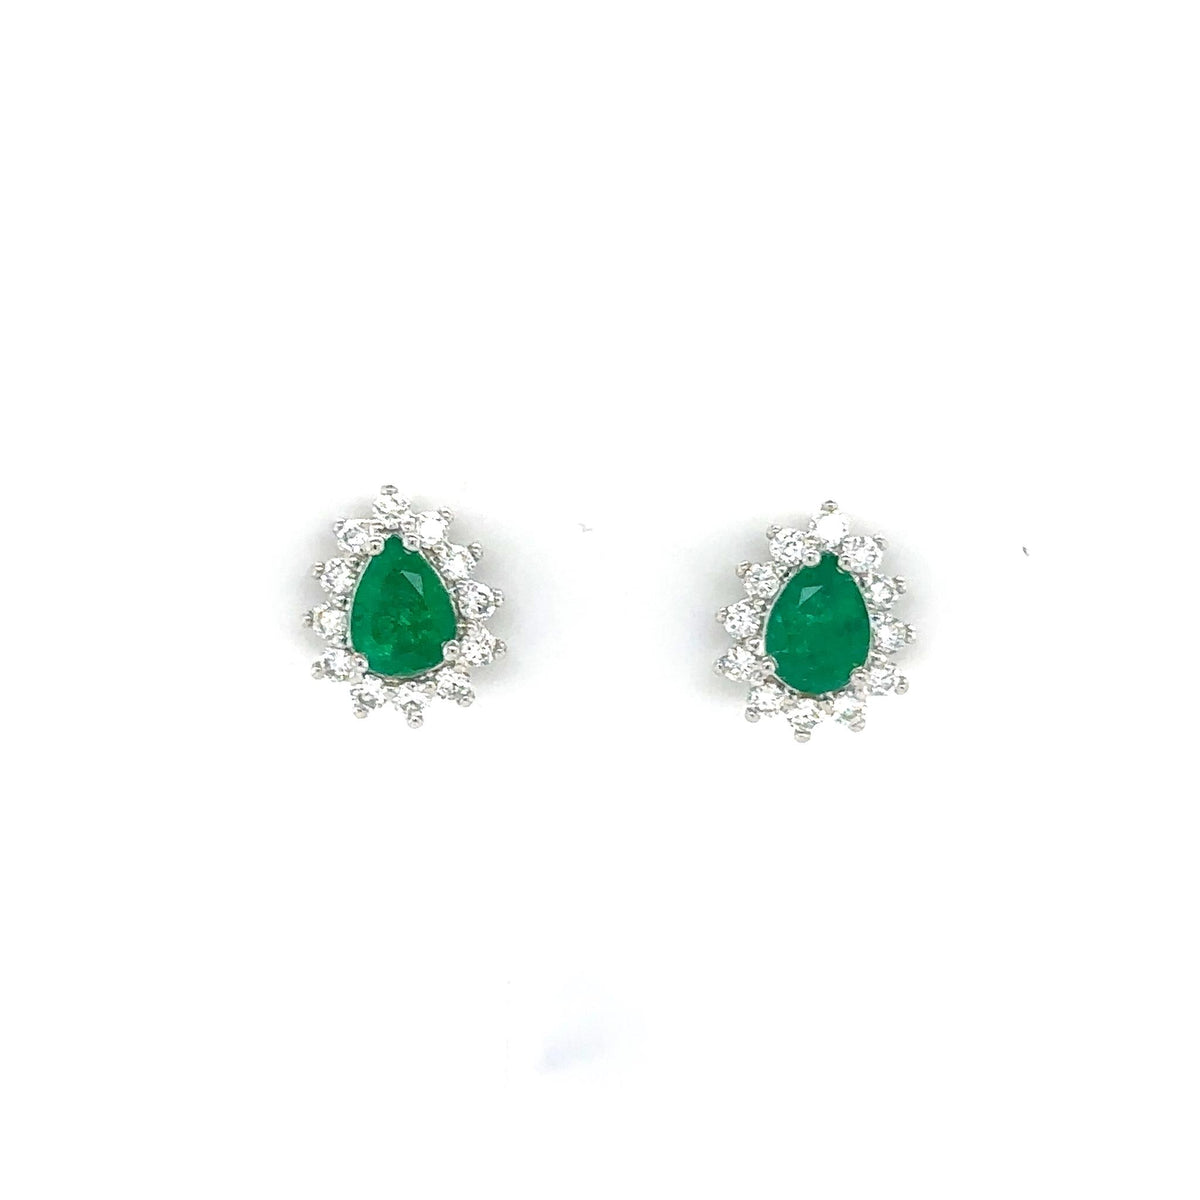 18Kt White Gold Halo Earrings Gemstone Earrings With 0.80ct Emeralds